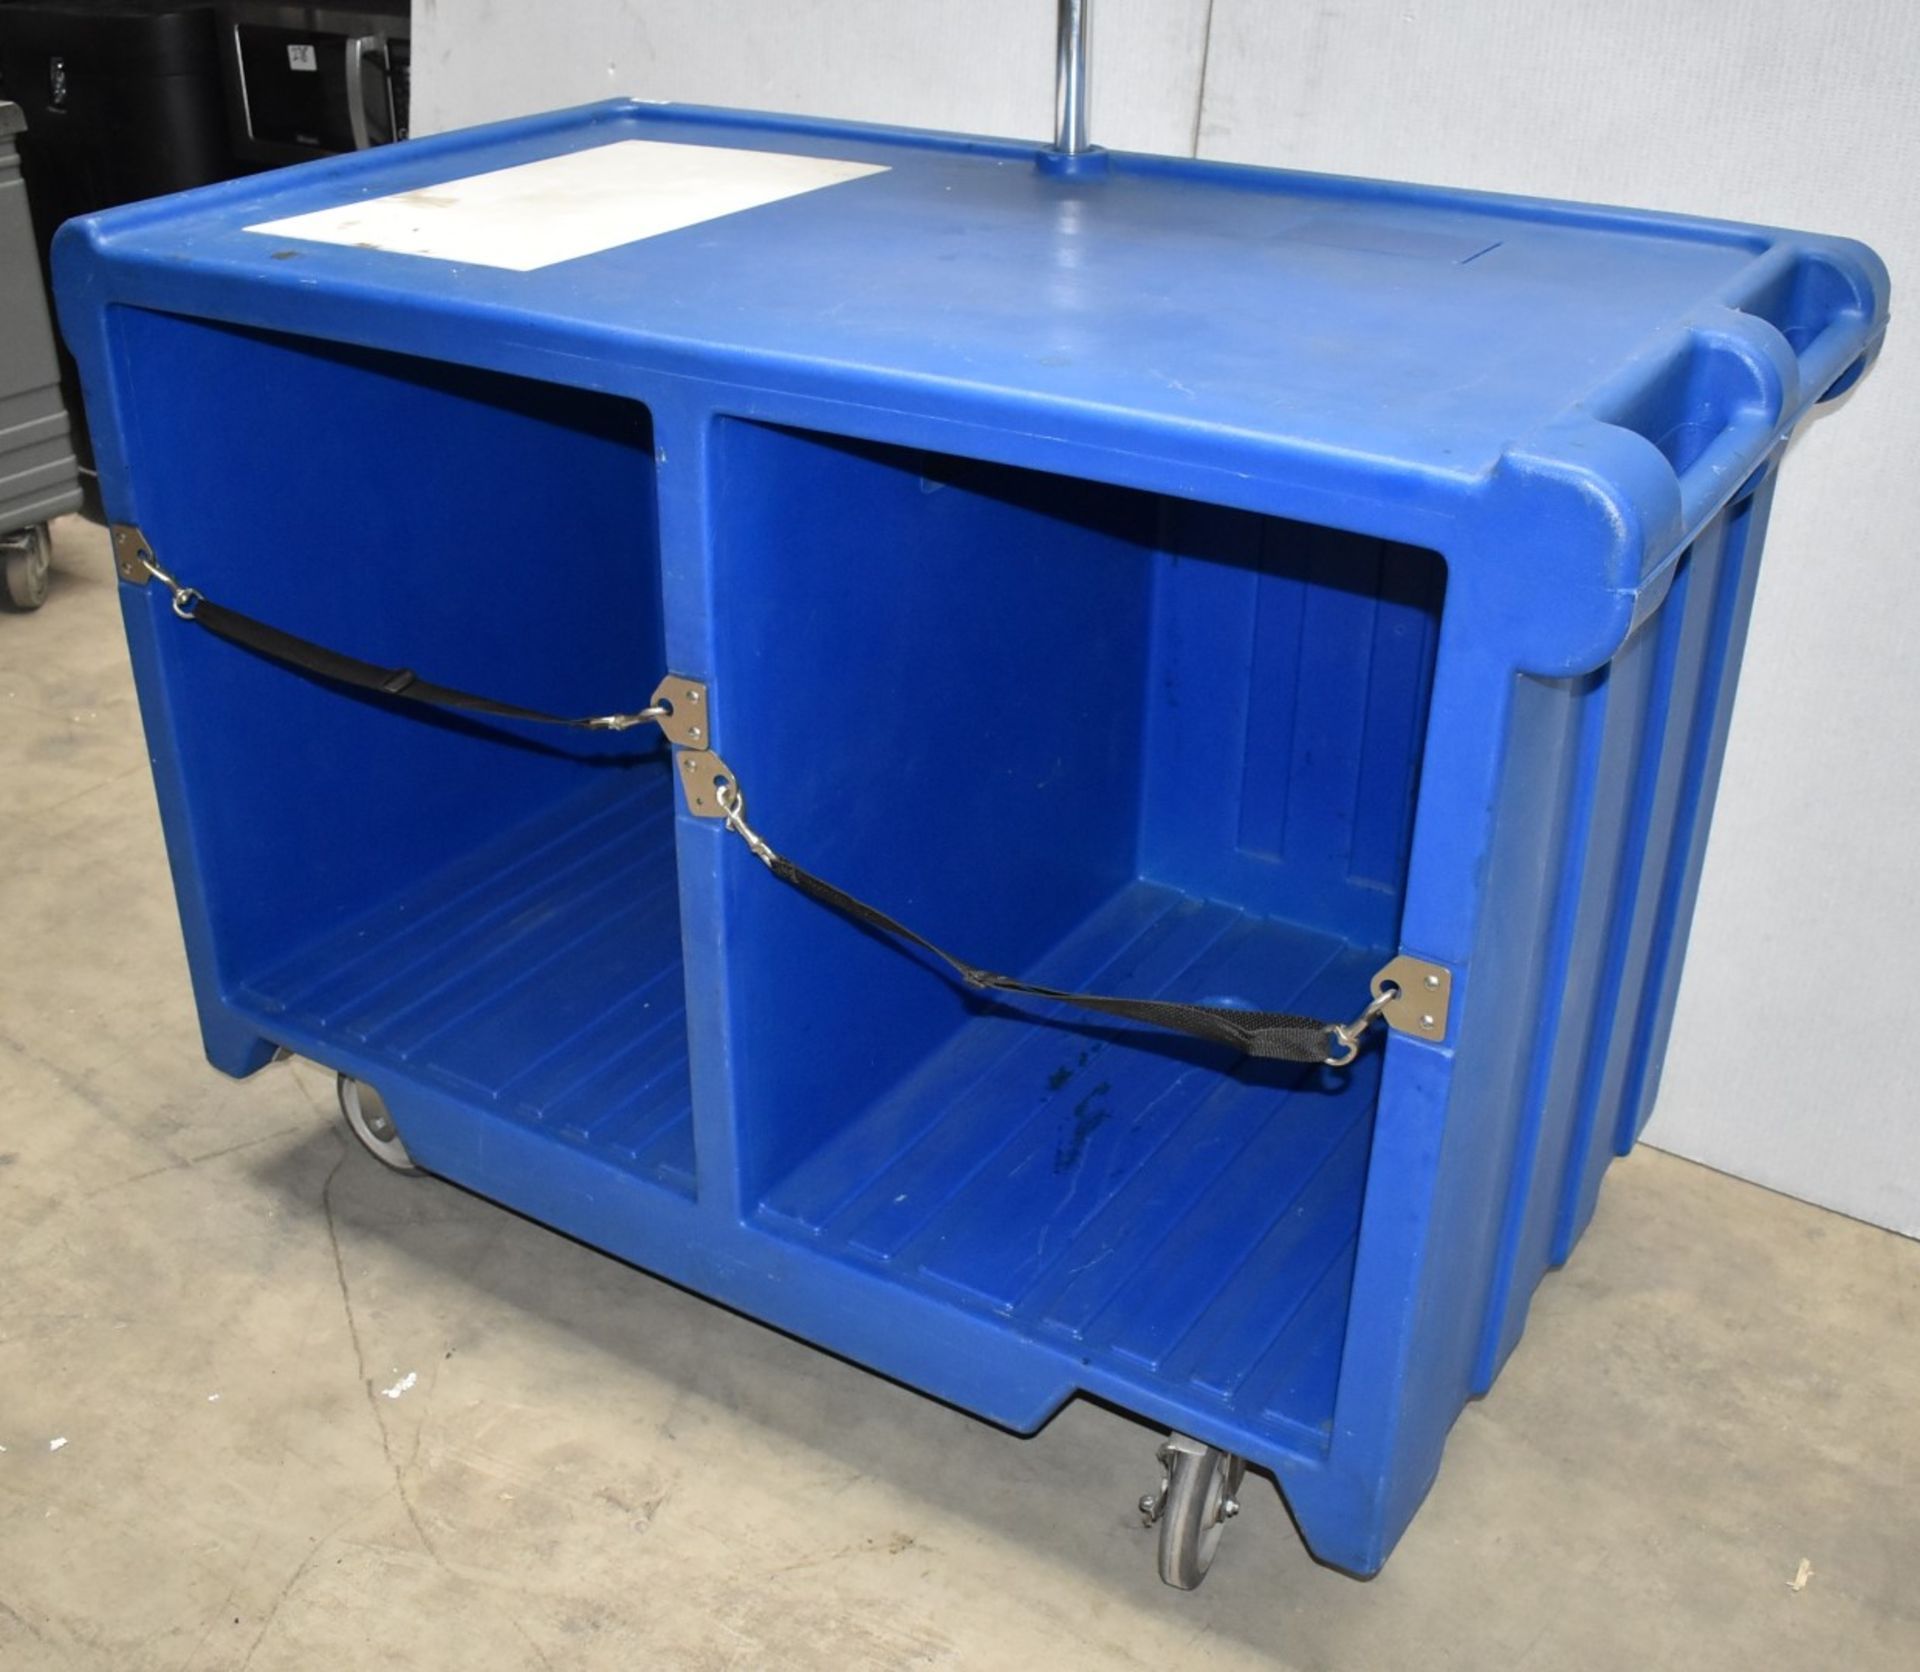 1 x Cambro Mobile BBQ Food Station With Parasol - Lightweight Plastic Design With Storage - Image 14 of 14